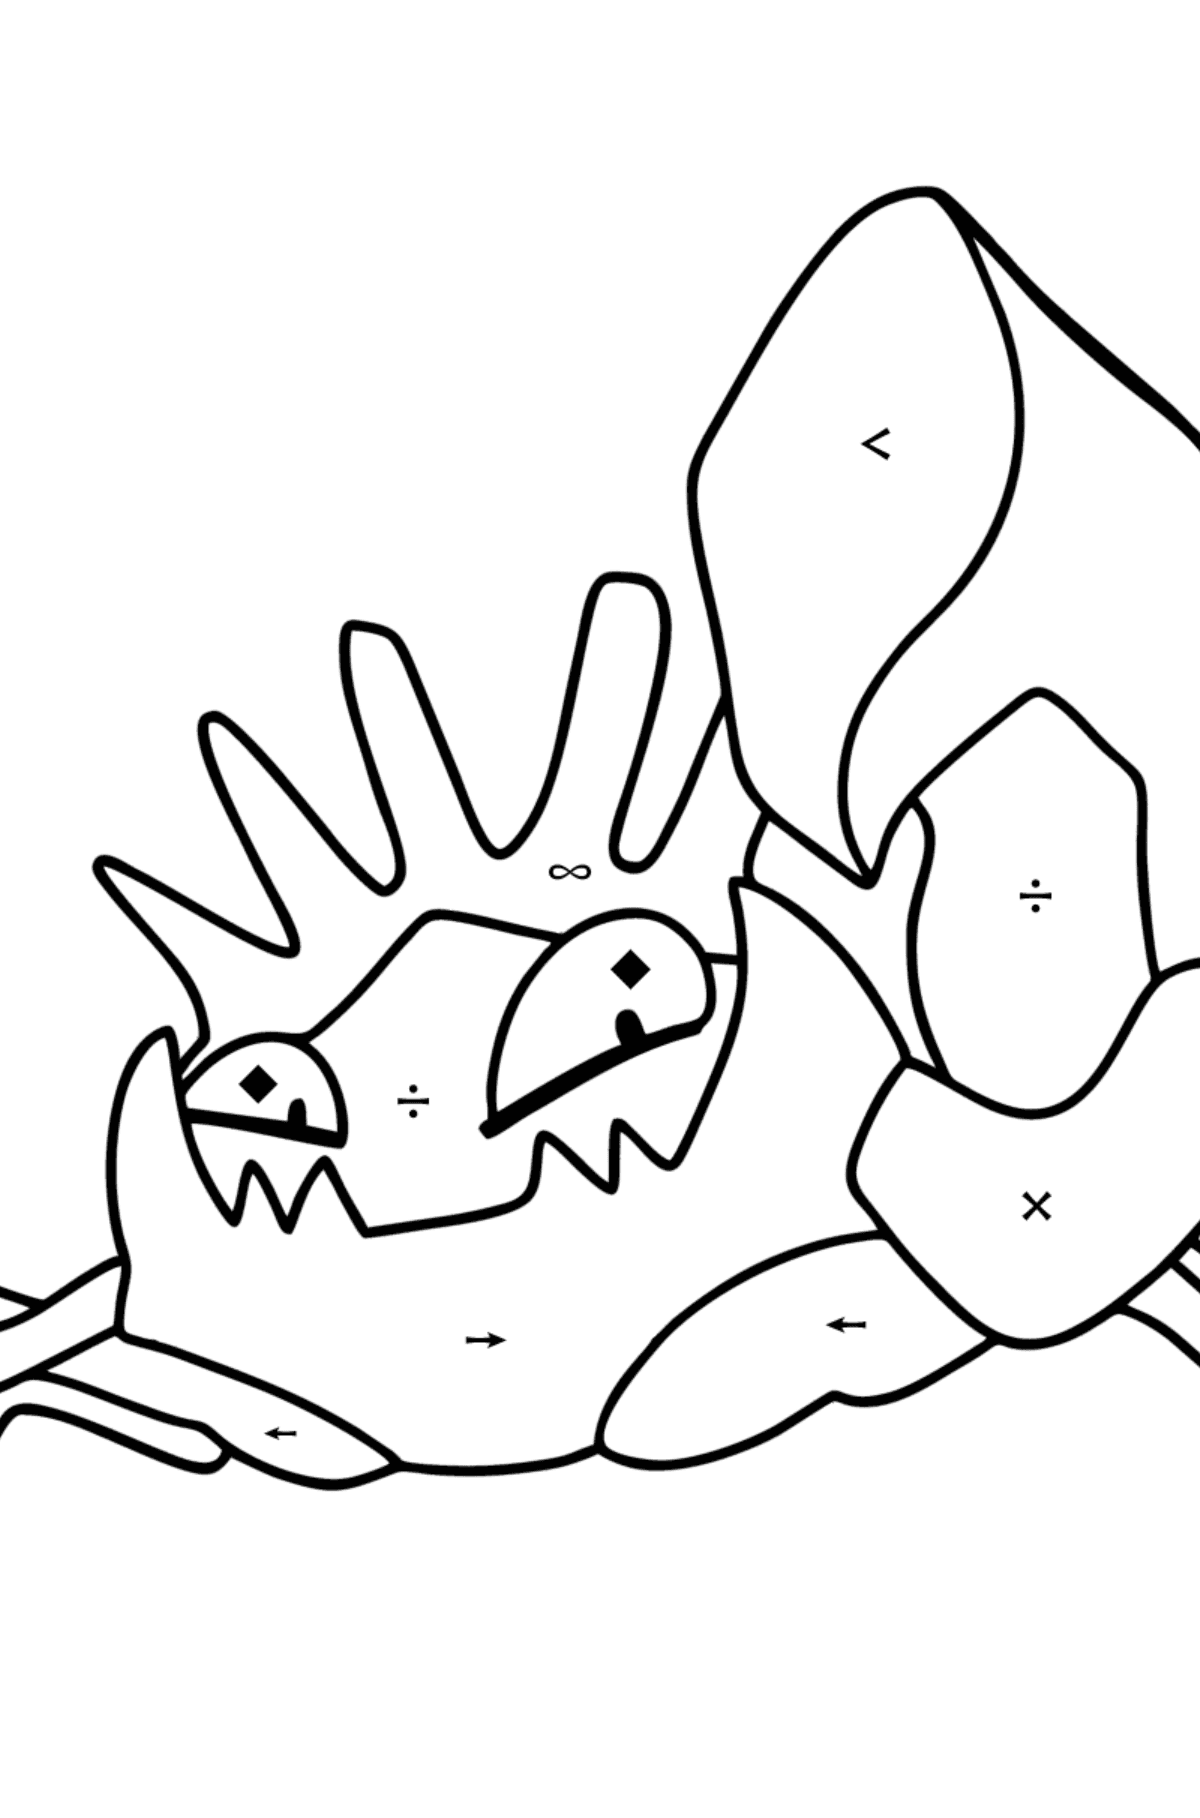 Pokemon Go Kingler coloring page - Coloring by Symbols for Kids